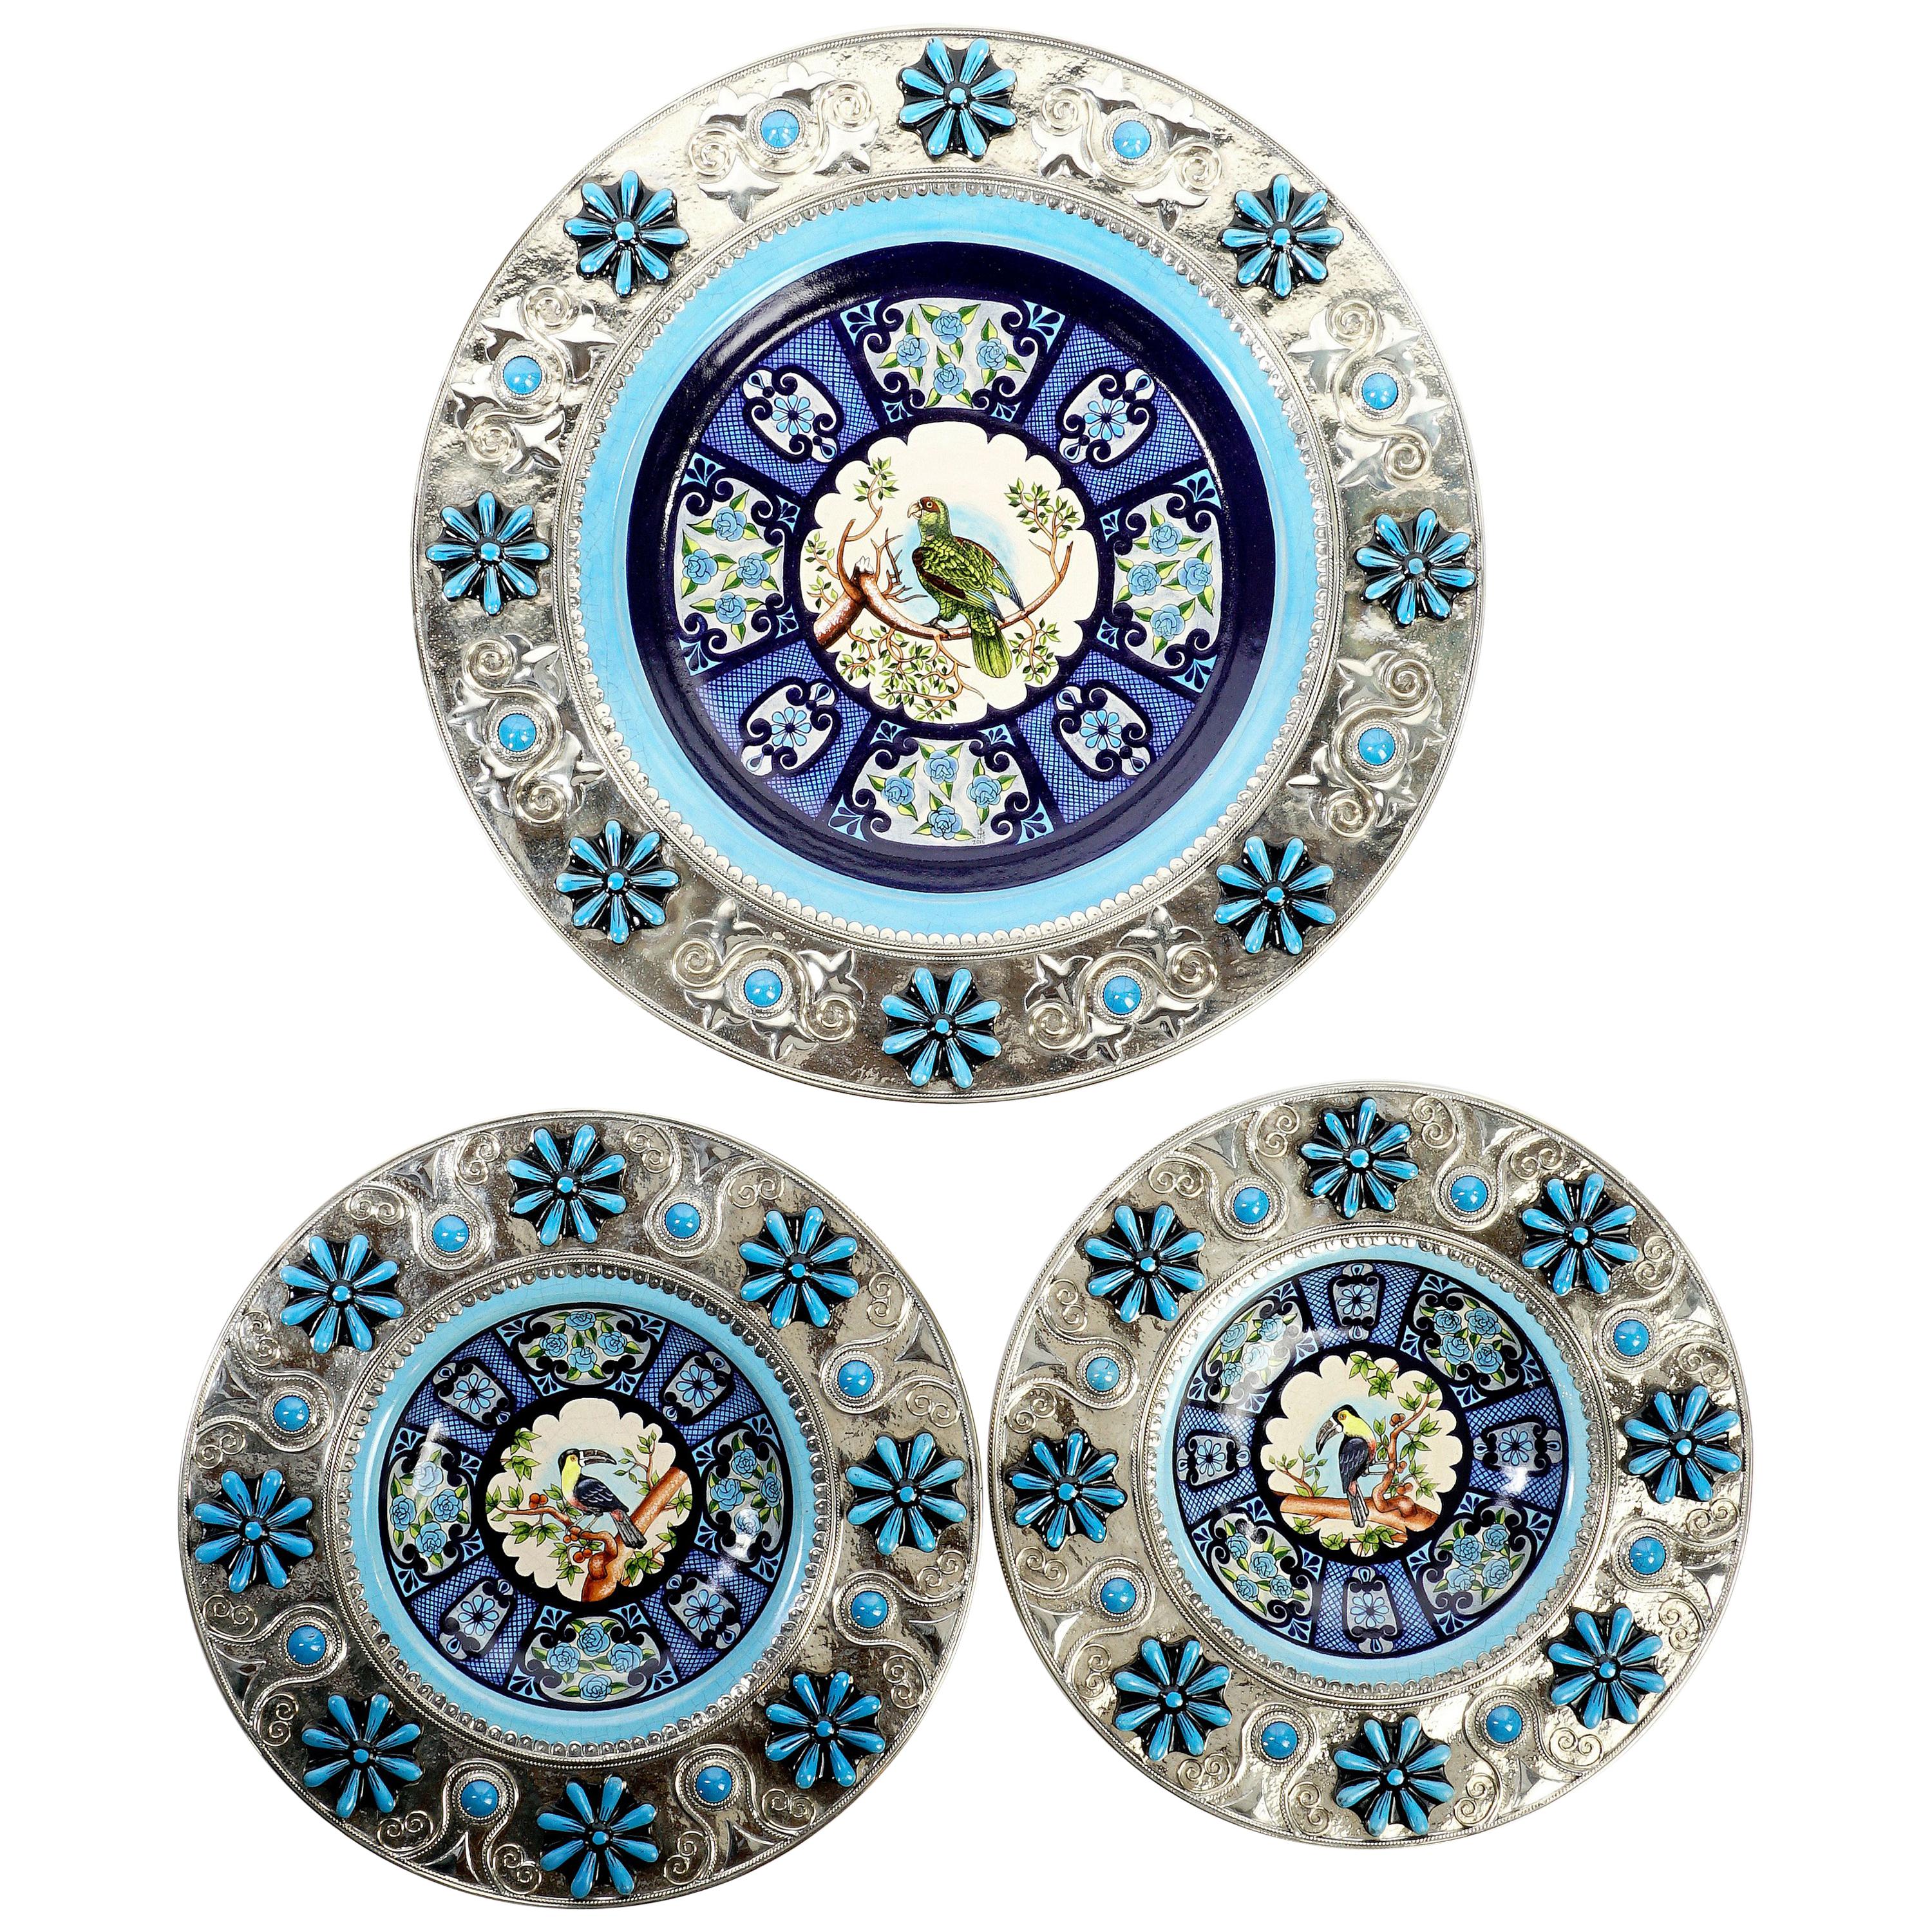 Ceramic and White Metal 'Alpaca' Toucans and Parrot Set of Plates